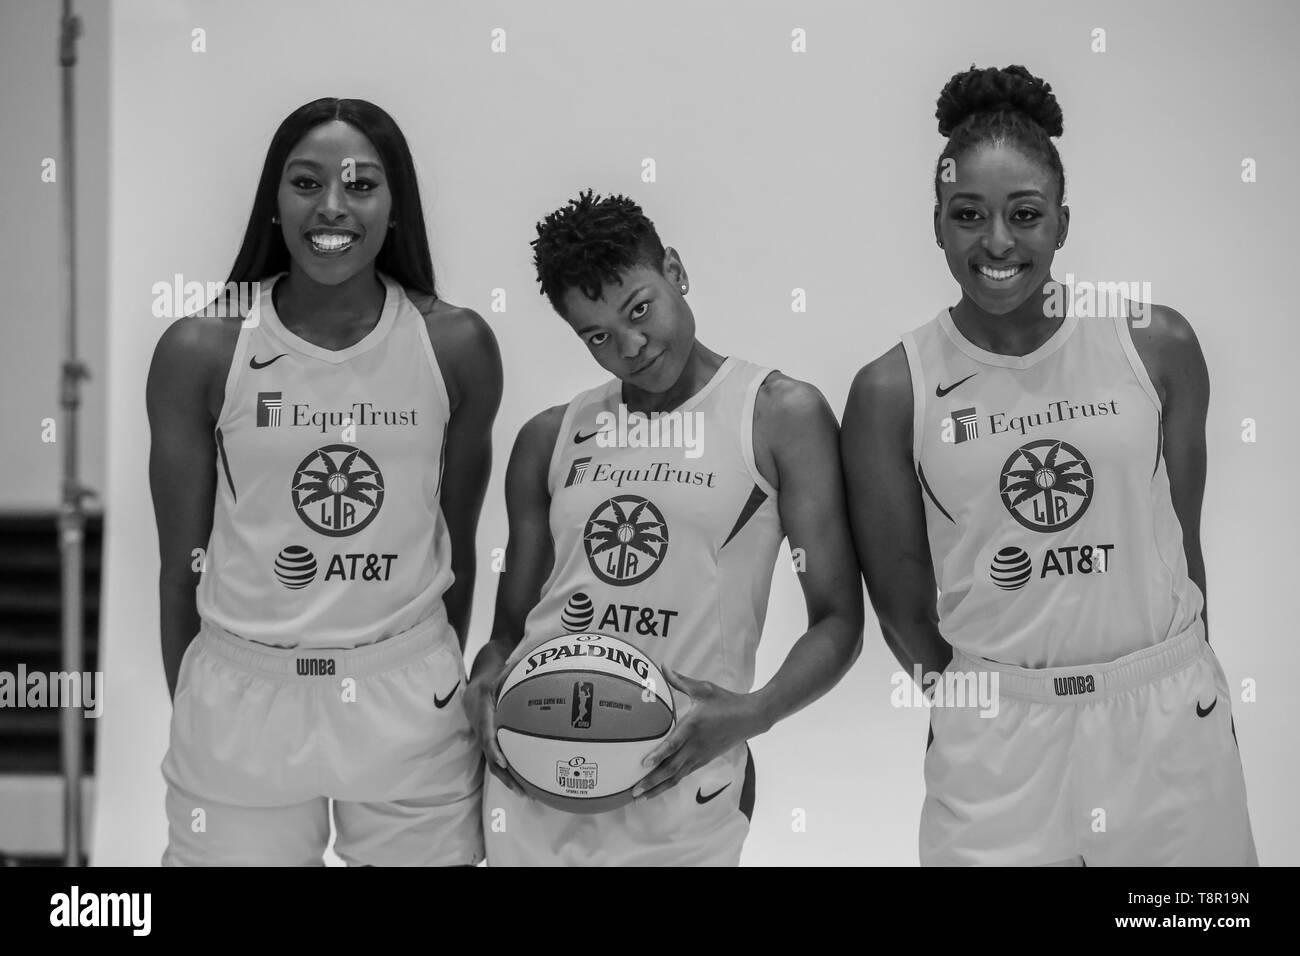 WNBA 2019: Los Angeles Sparks forward Chiney Ogwumike #13, Los Angeles Sparks guard Alana Beard #0, and Los Angeles Sparks forward Nneka Ogwumike #30 during Los Angeles Sparks Media Day May 14, 2019 at Los Angeles Southwest College. (Photo by Jevone Moore) Stock Photo